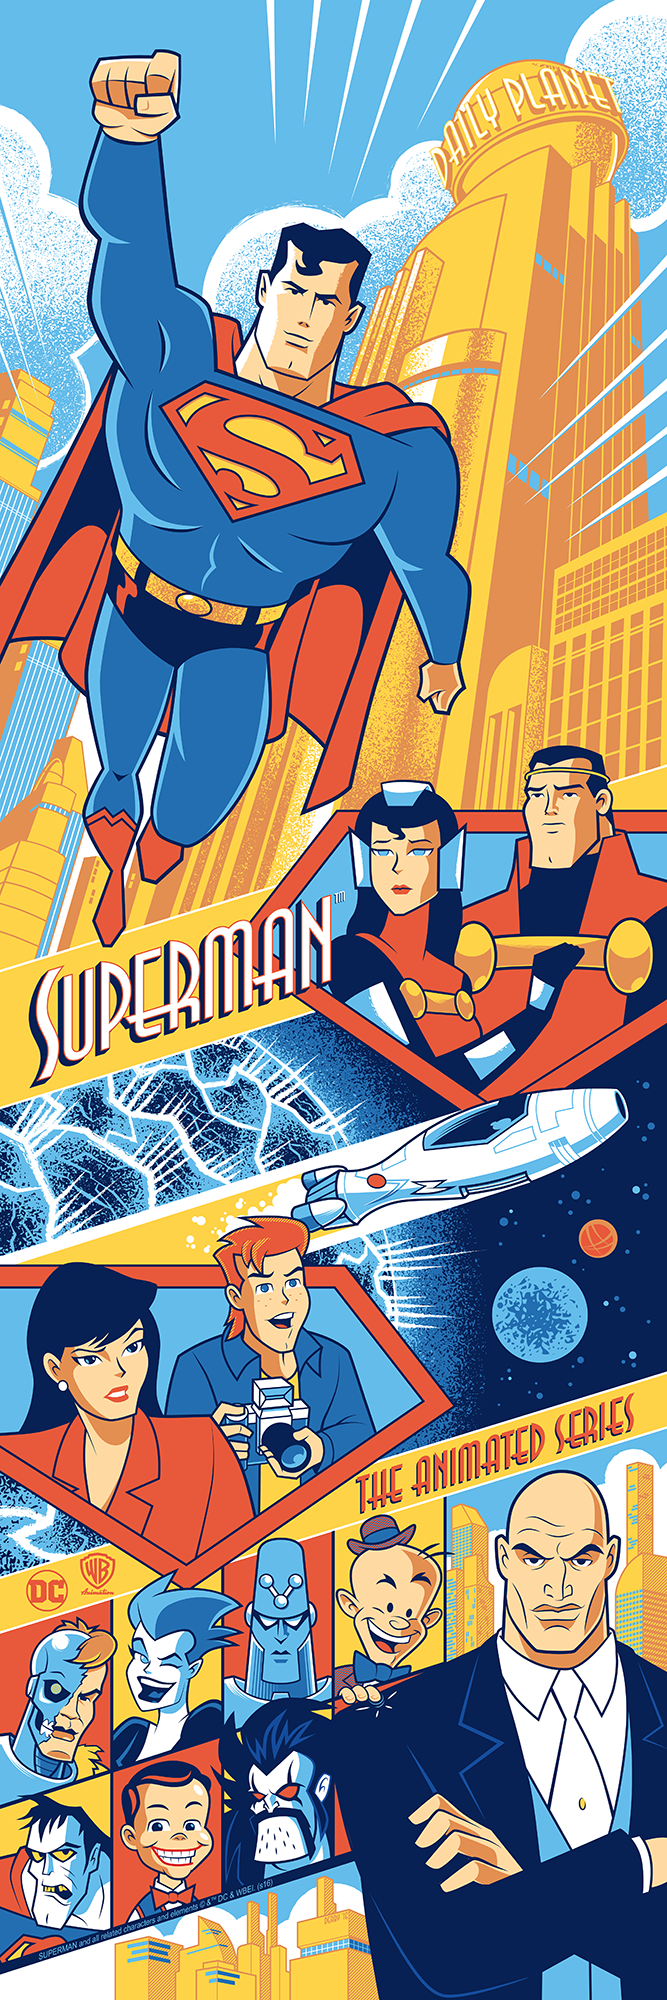 Scott Derby "Superman: The Animated Series"